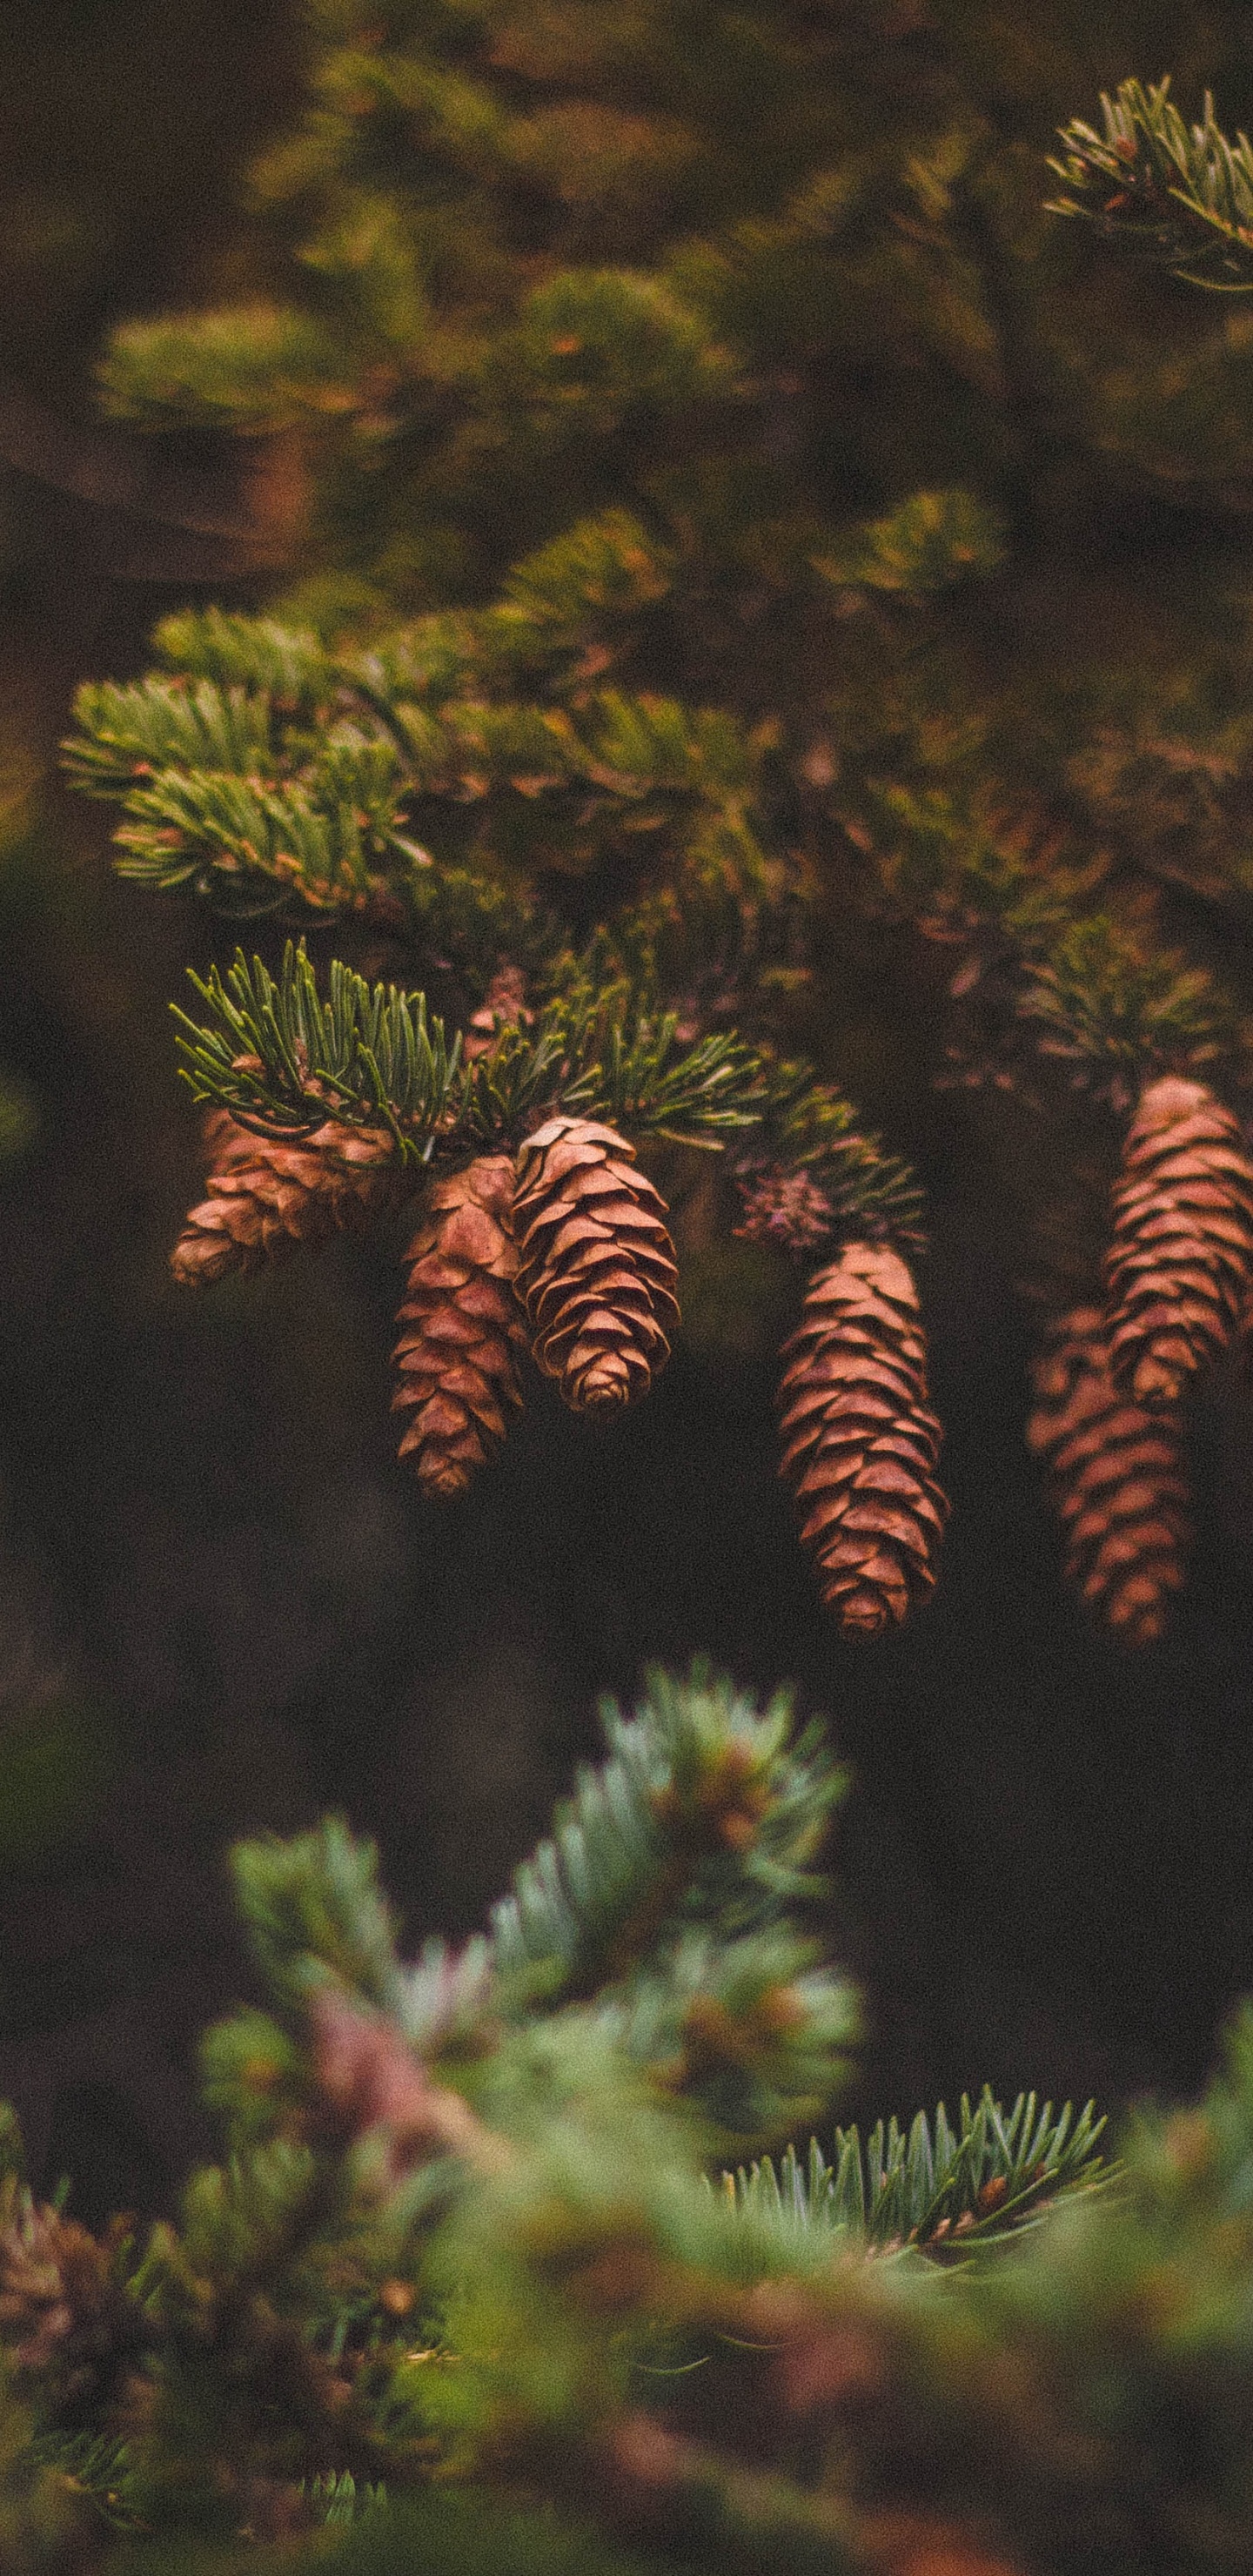 Green Pine Cone on Green Pine Tree. Wallpaper in 1440x2960 Resolution